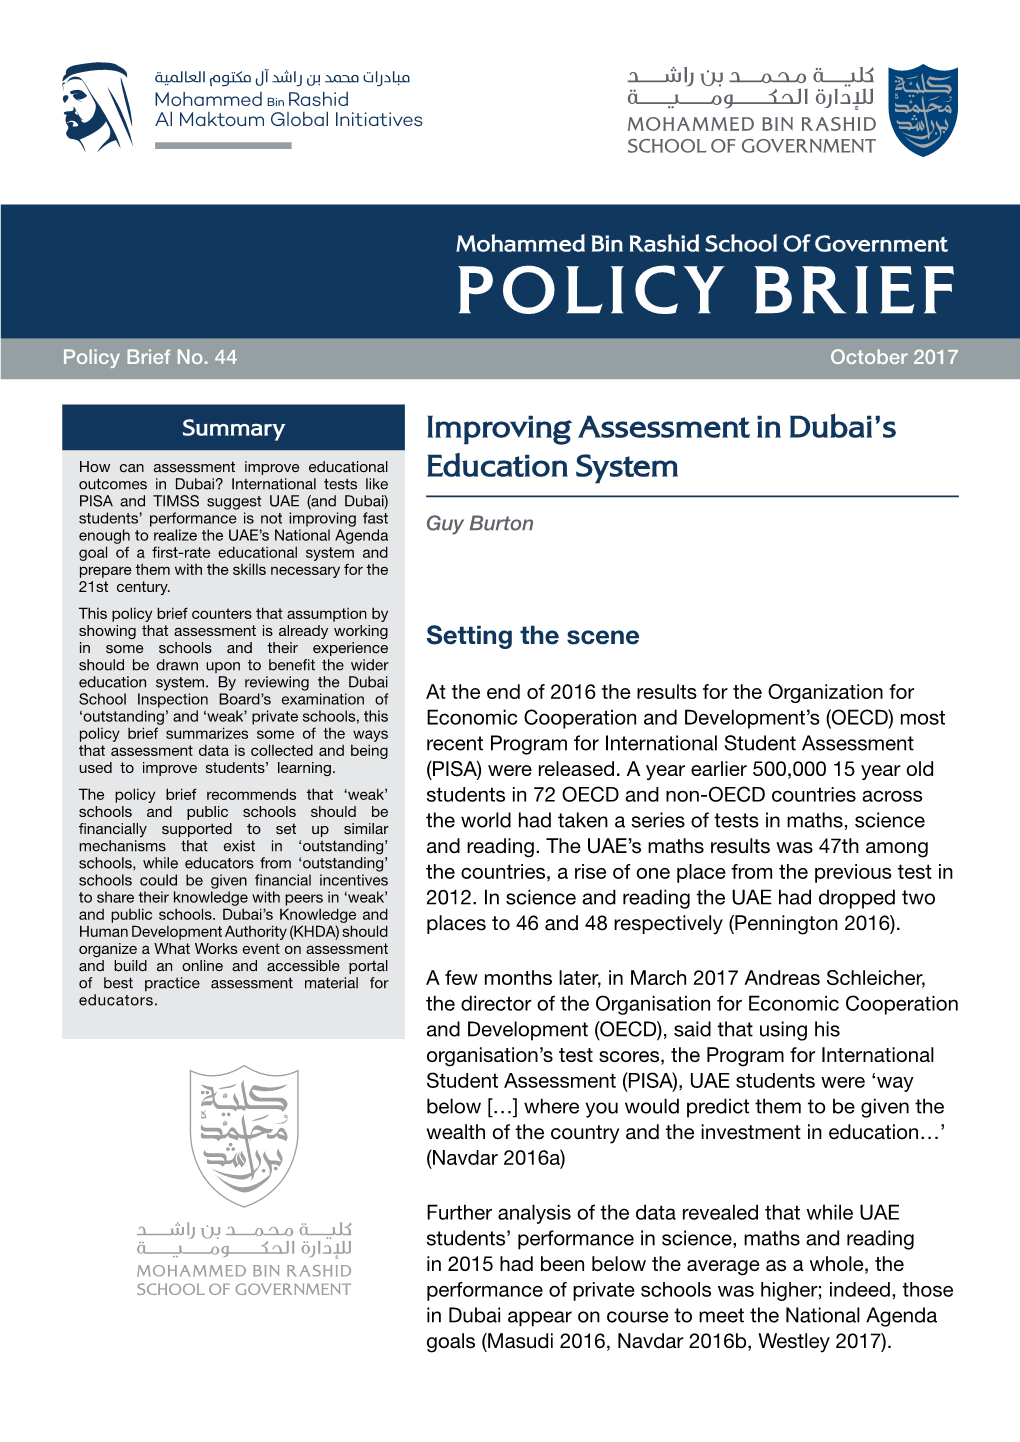 Private Schools in Relation to Assessment in Dubai?